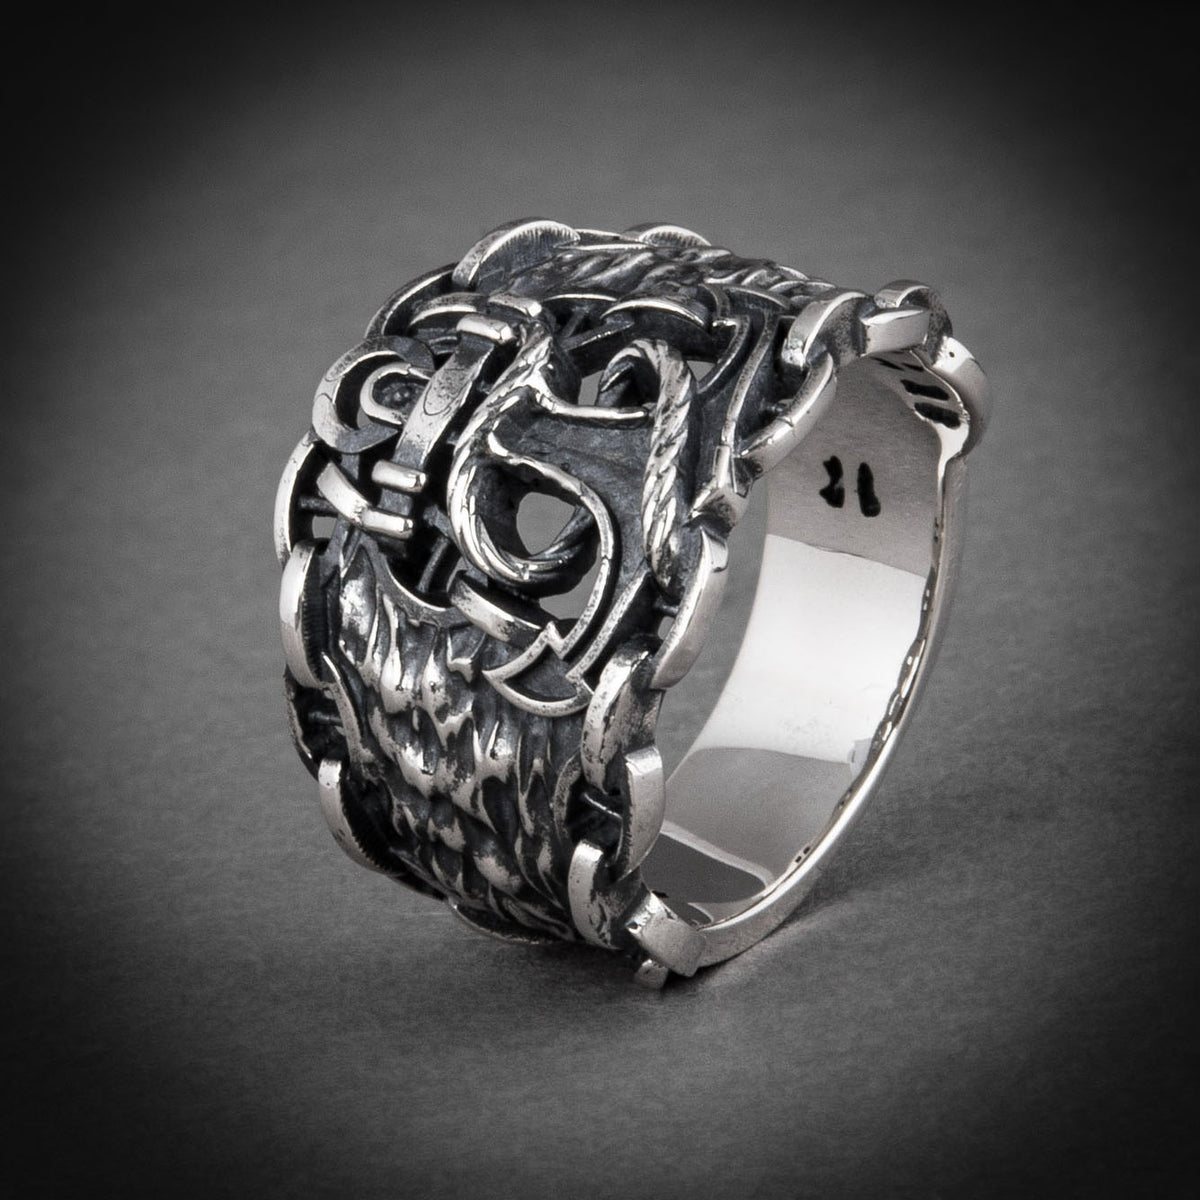 Pirate Rope and Anchor Solid Silver Ring showing band